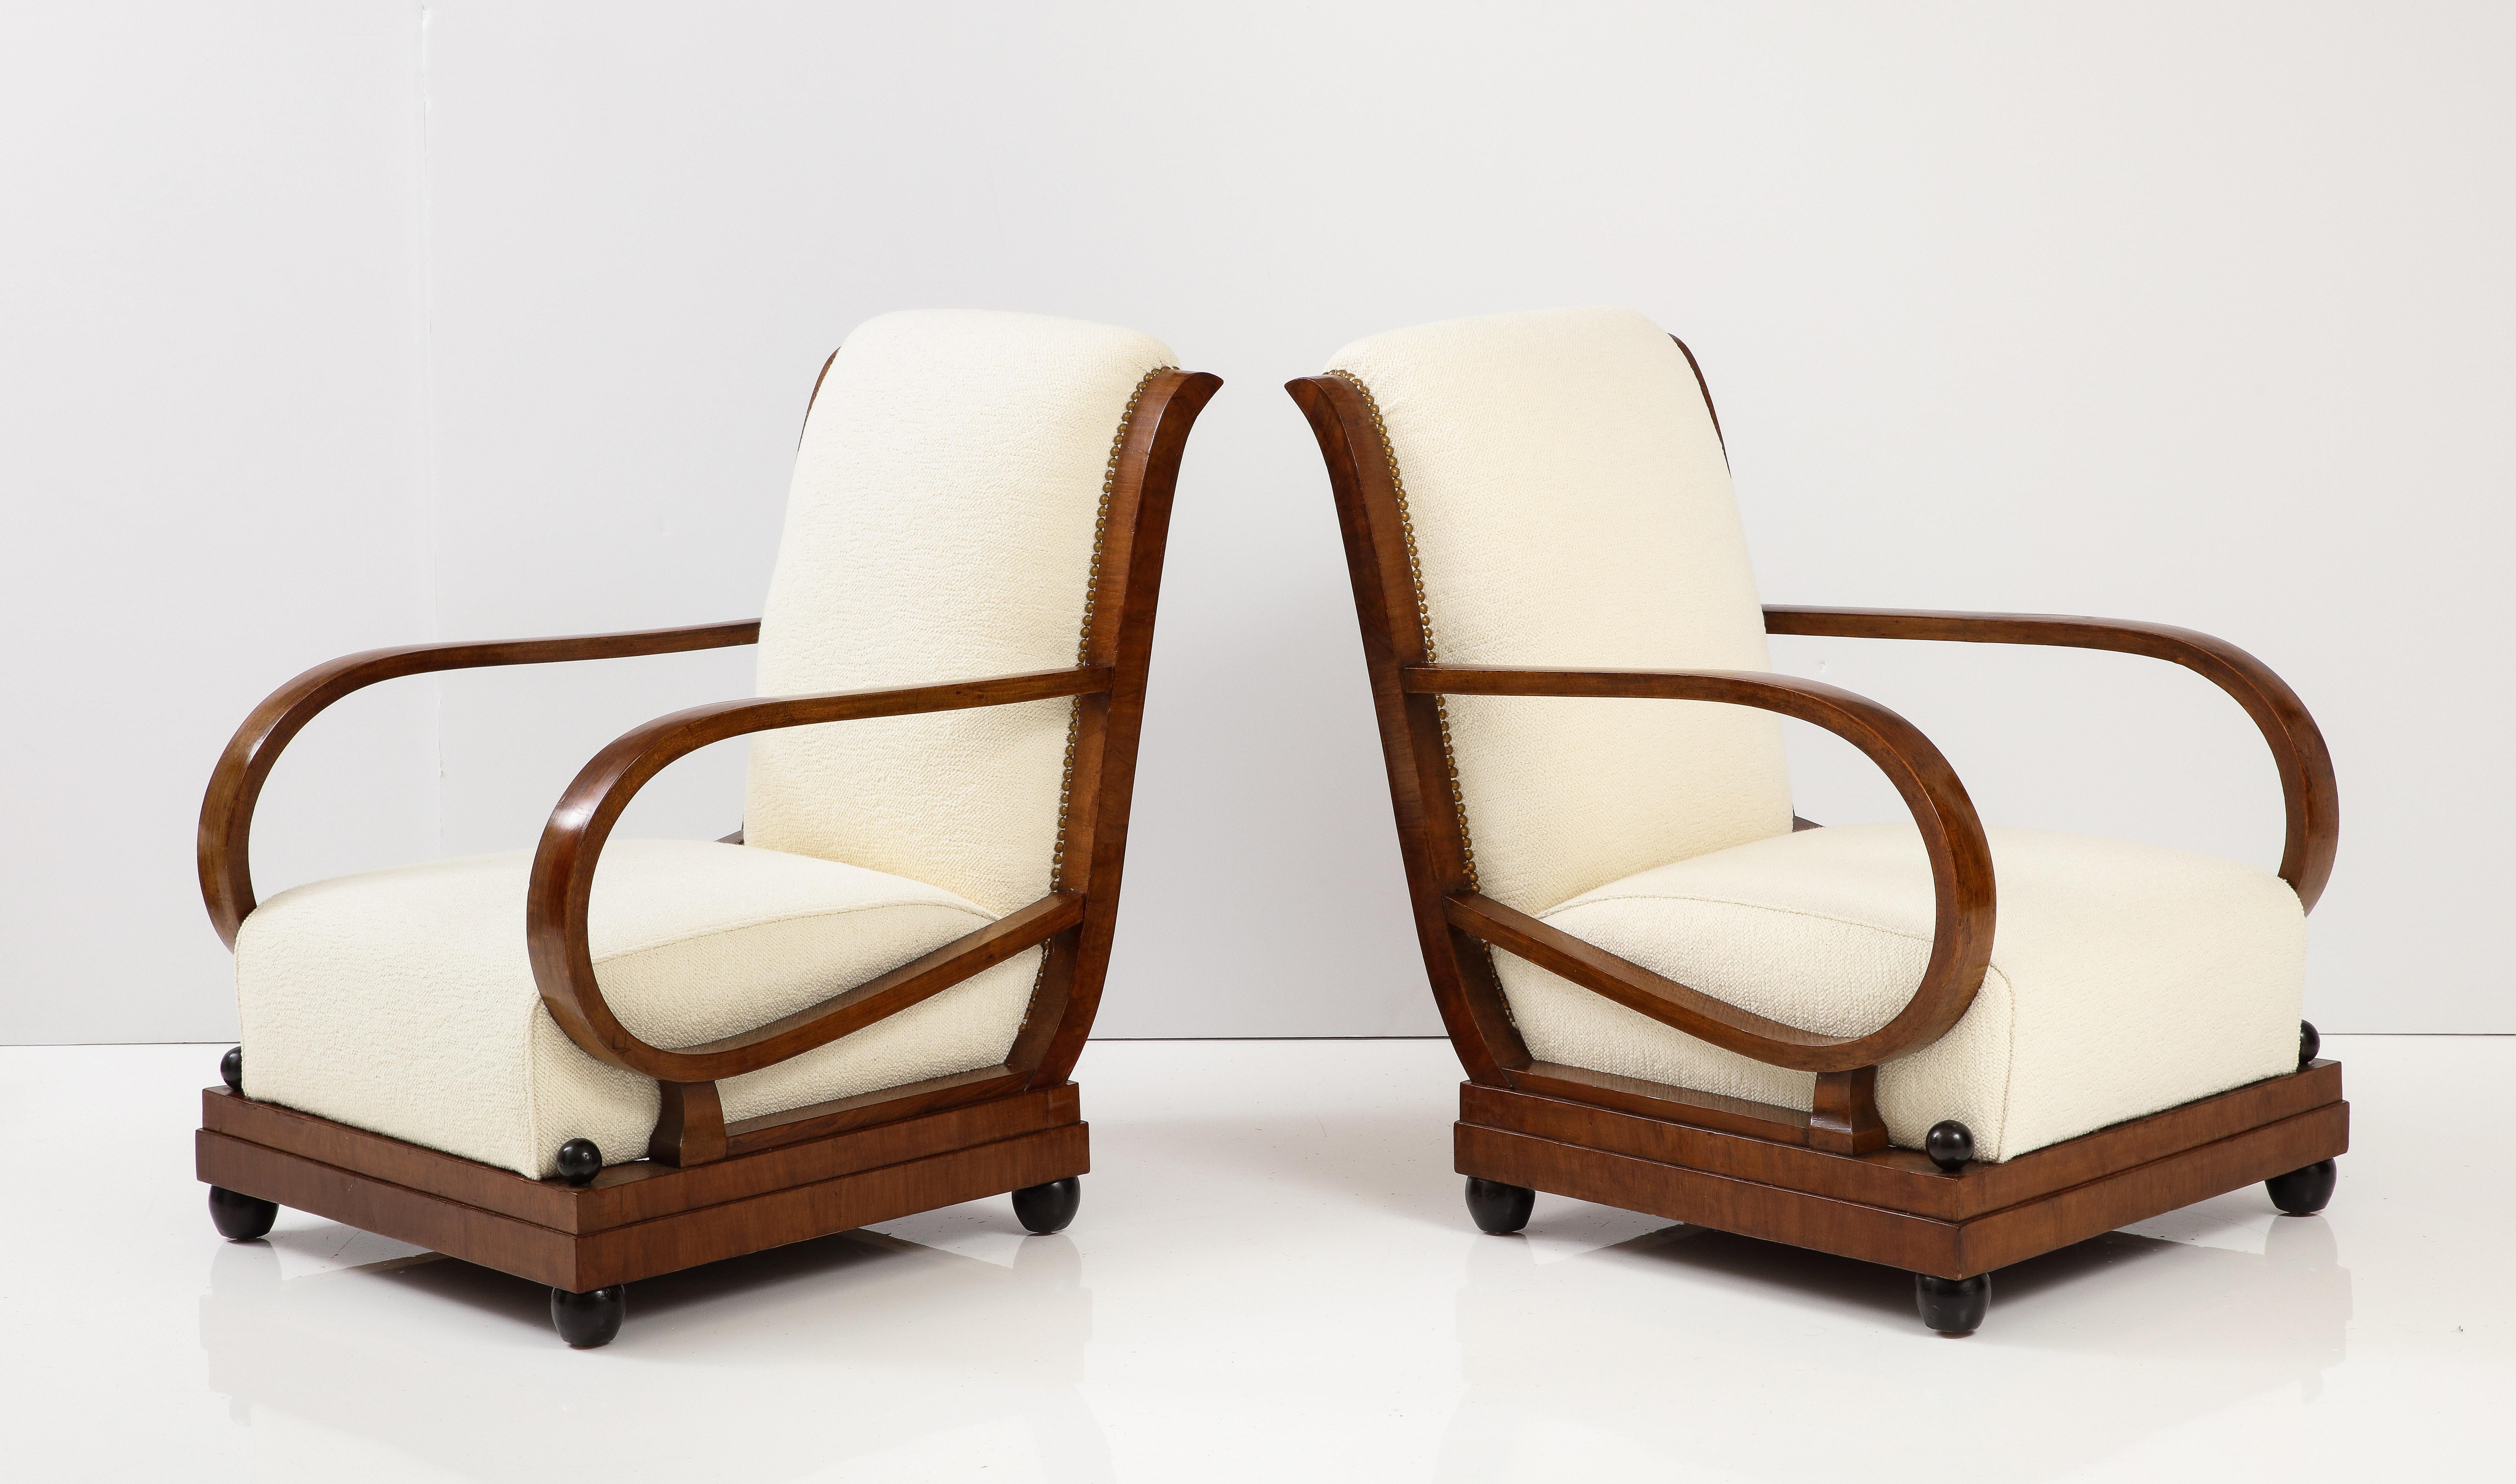 Hand-Carved Italian 1920's Walnut Armchairs / Lounge Chairs with Foot Stools